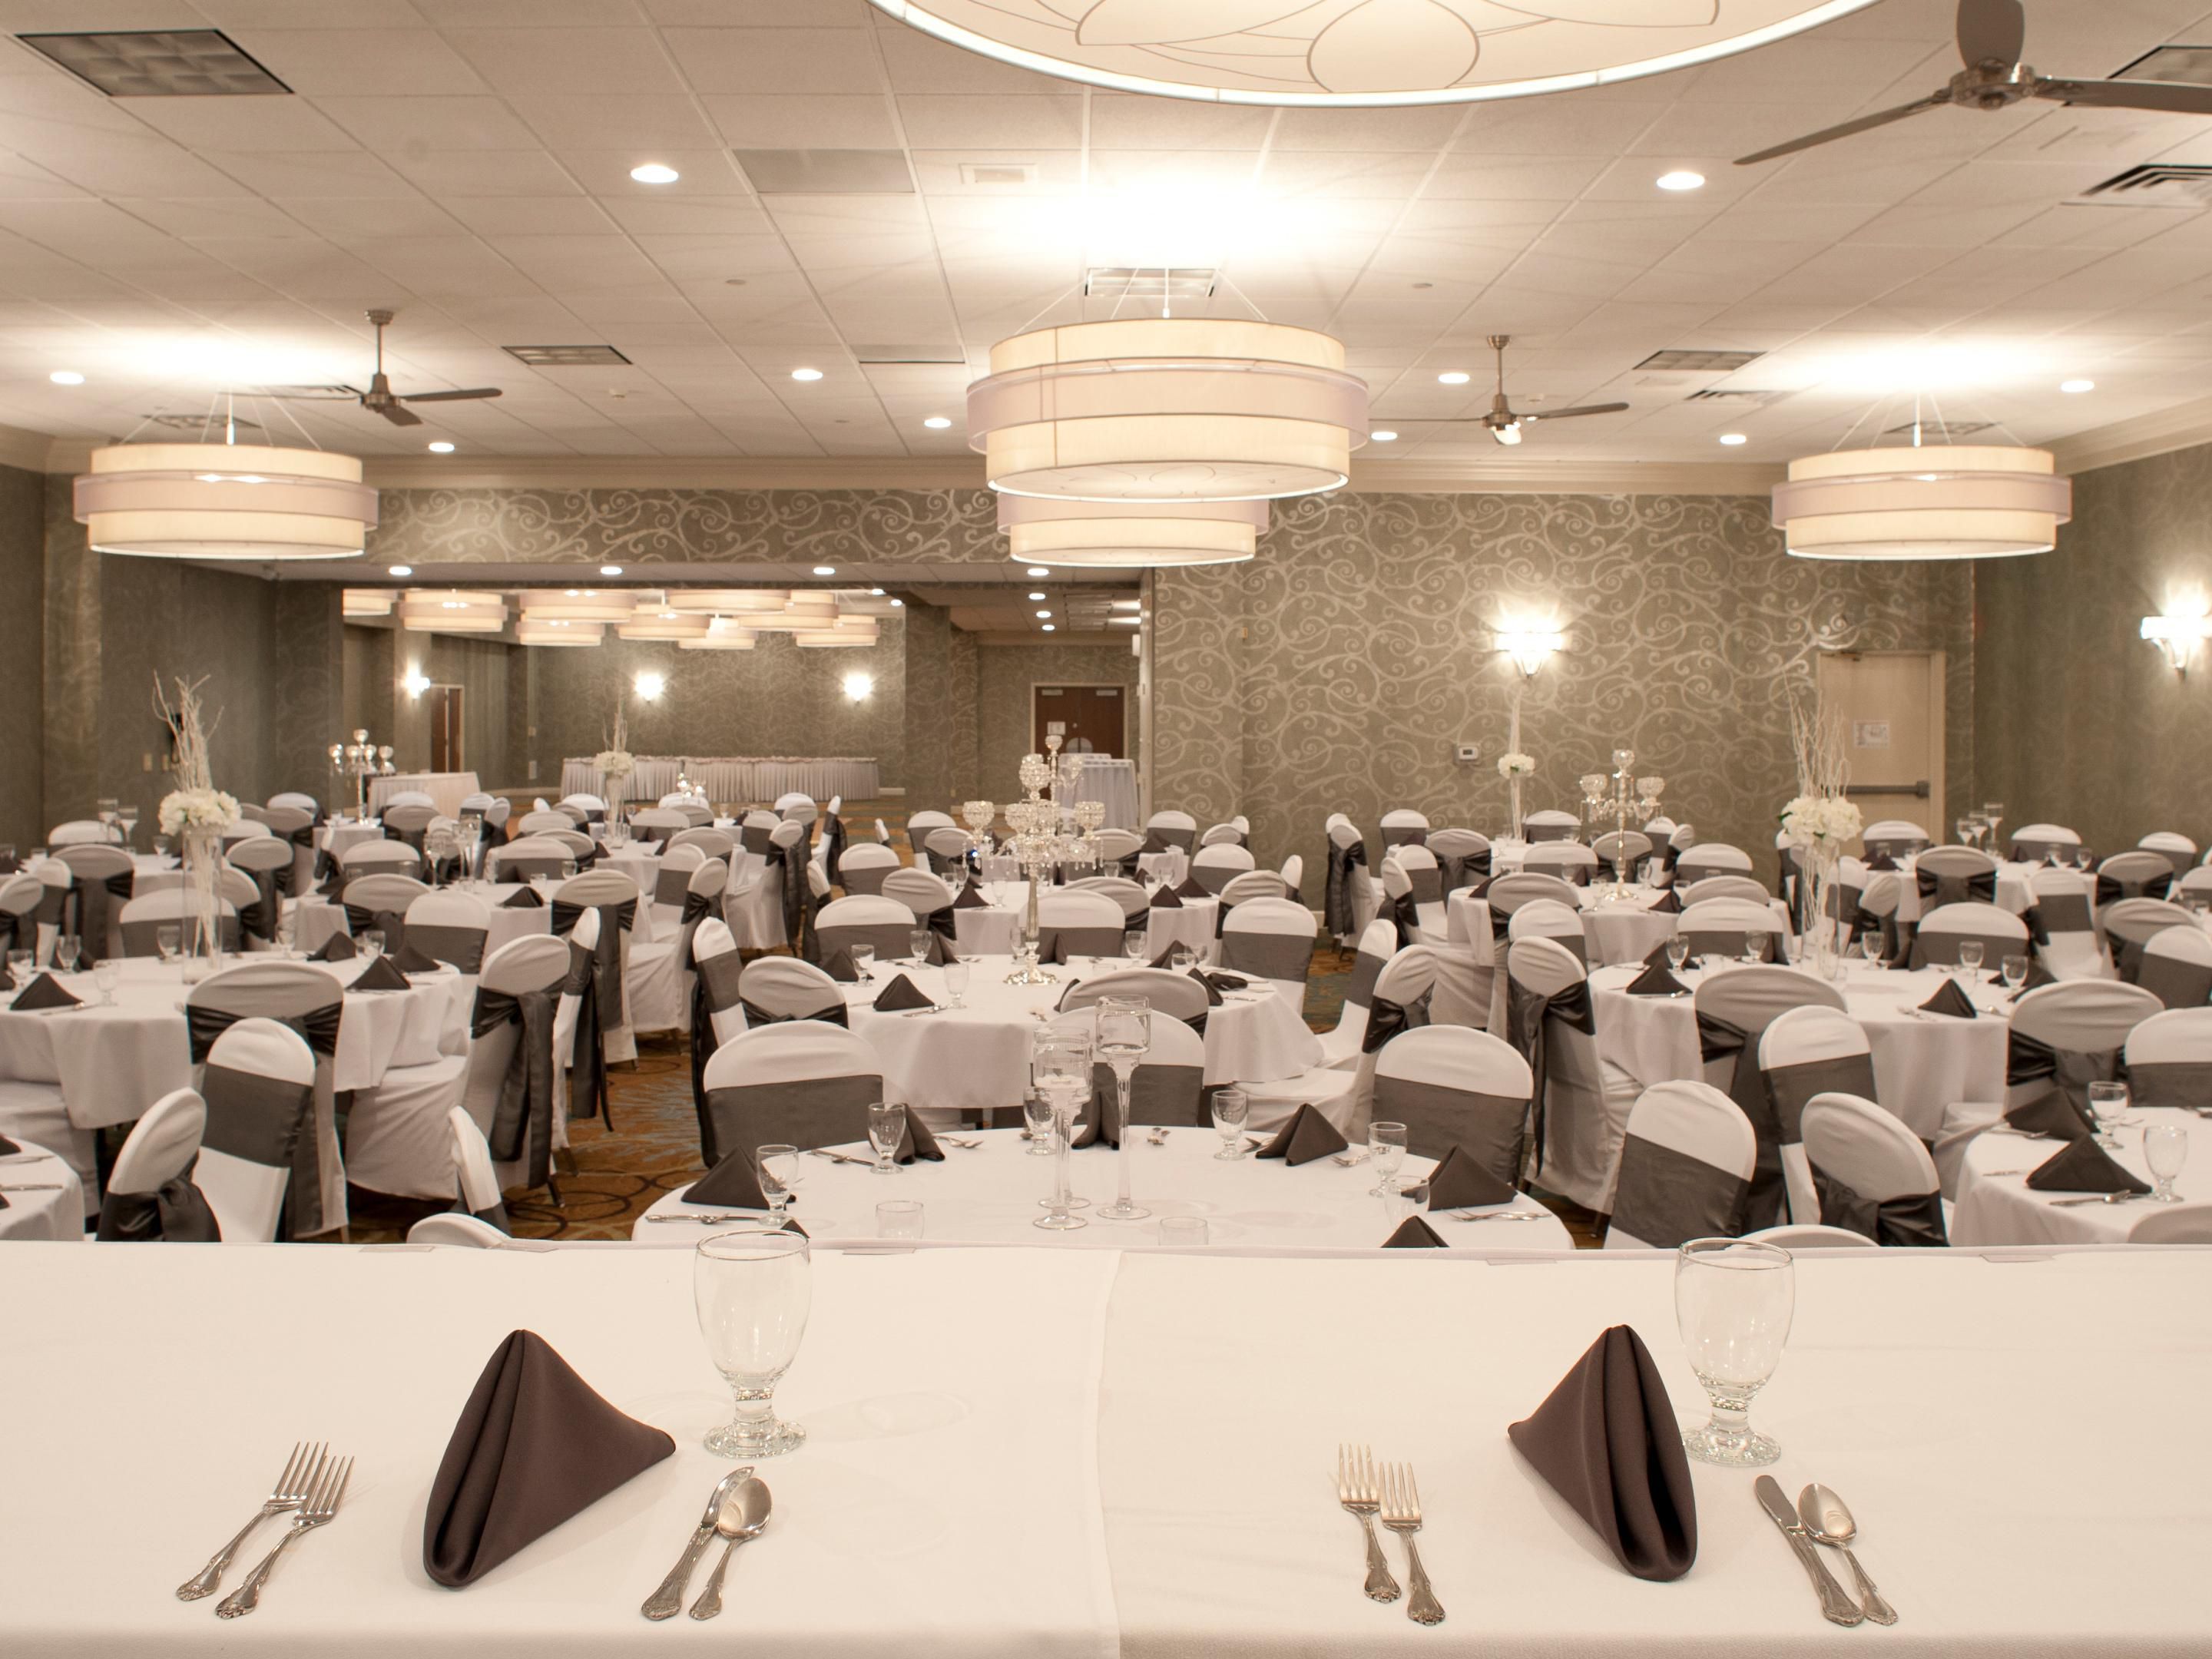 With 8 meeting rooms and 10,000 sq. ft. of event space, we can seat up to 500 guests for a wedding or 400 guests for a classroom style meeting. Our event space can be beautifully transformed to meet the needs of your style and budget. Contact our professional event planners at 309-948-5693 for a free custom quote today!